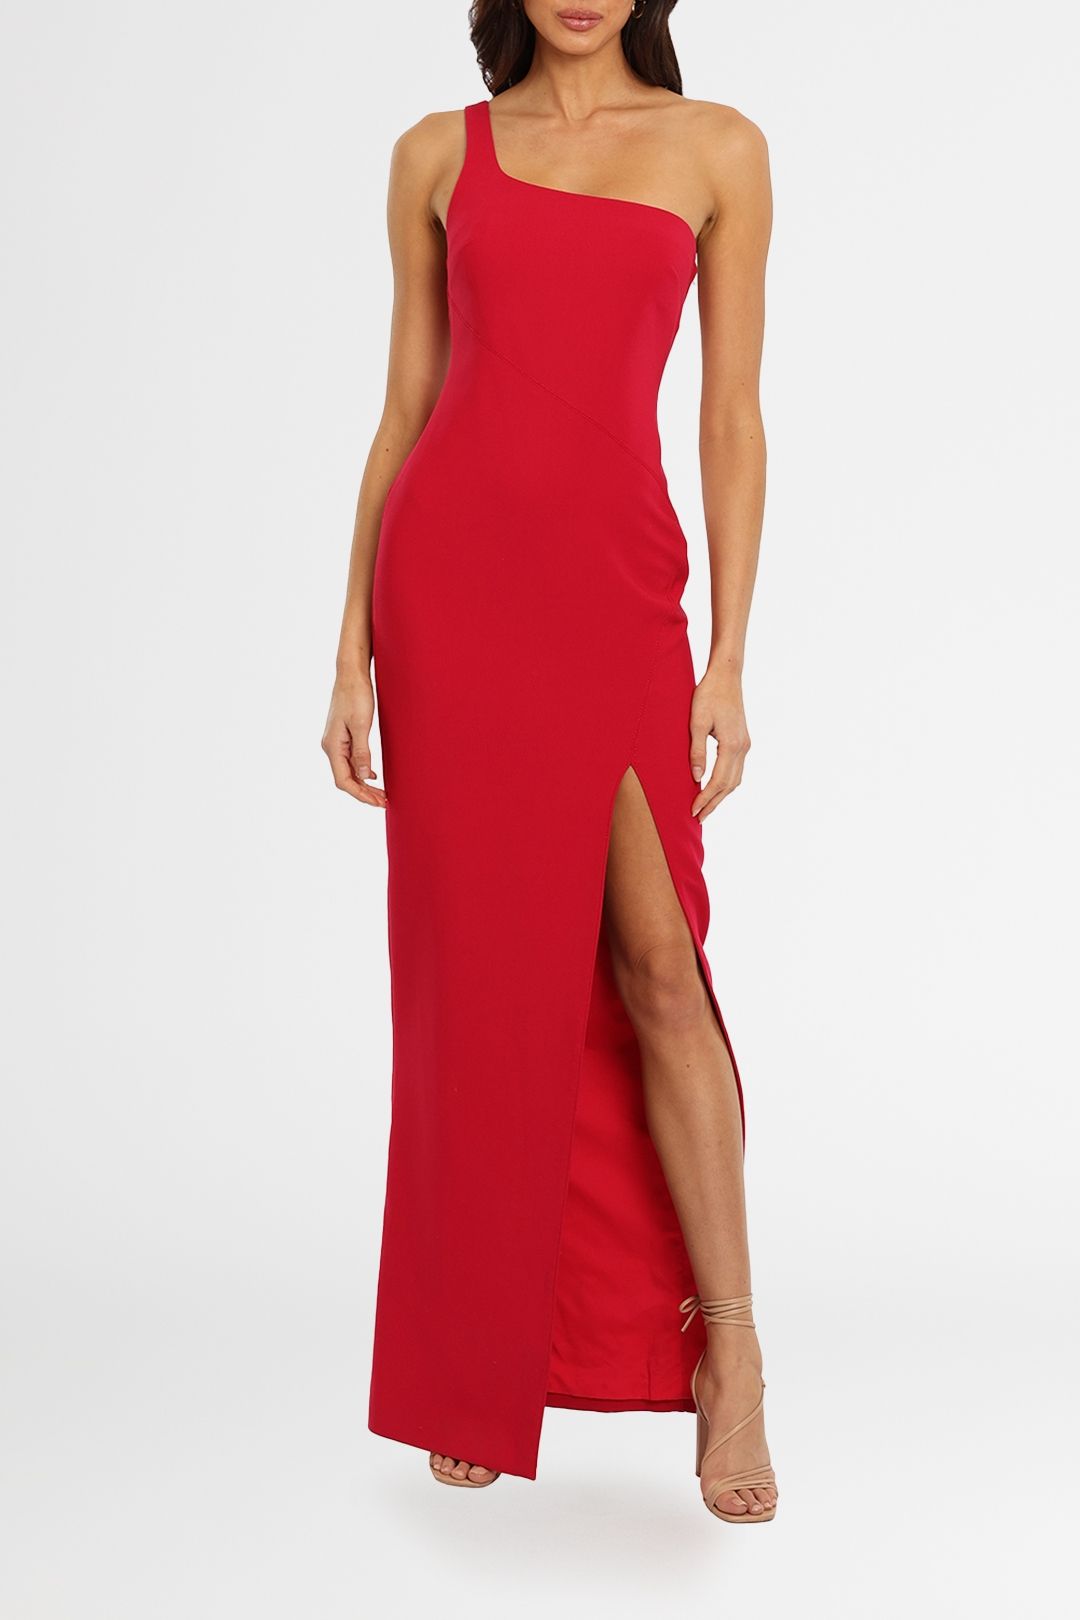 Likely NYC Camden Gown Scarlett red